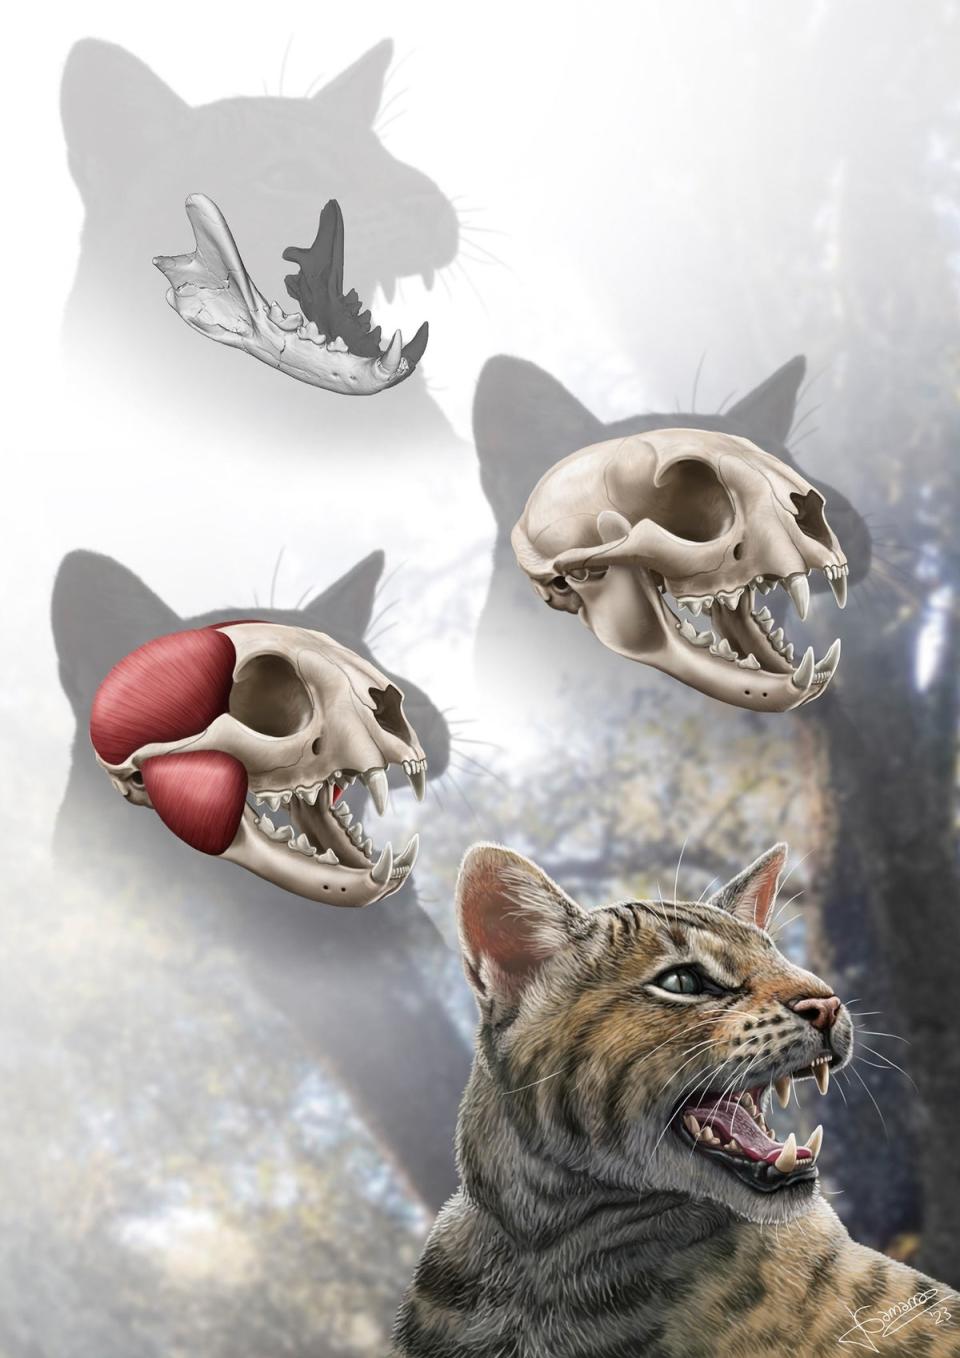 Reconstruction of the mandible, skull, masticatory muscles, and life appearance of Magerifelis peignei (Artwork by J. Gamarra/Journal of Vertebrate Paleontology)